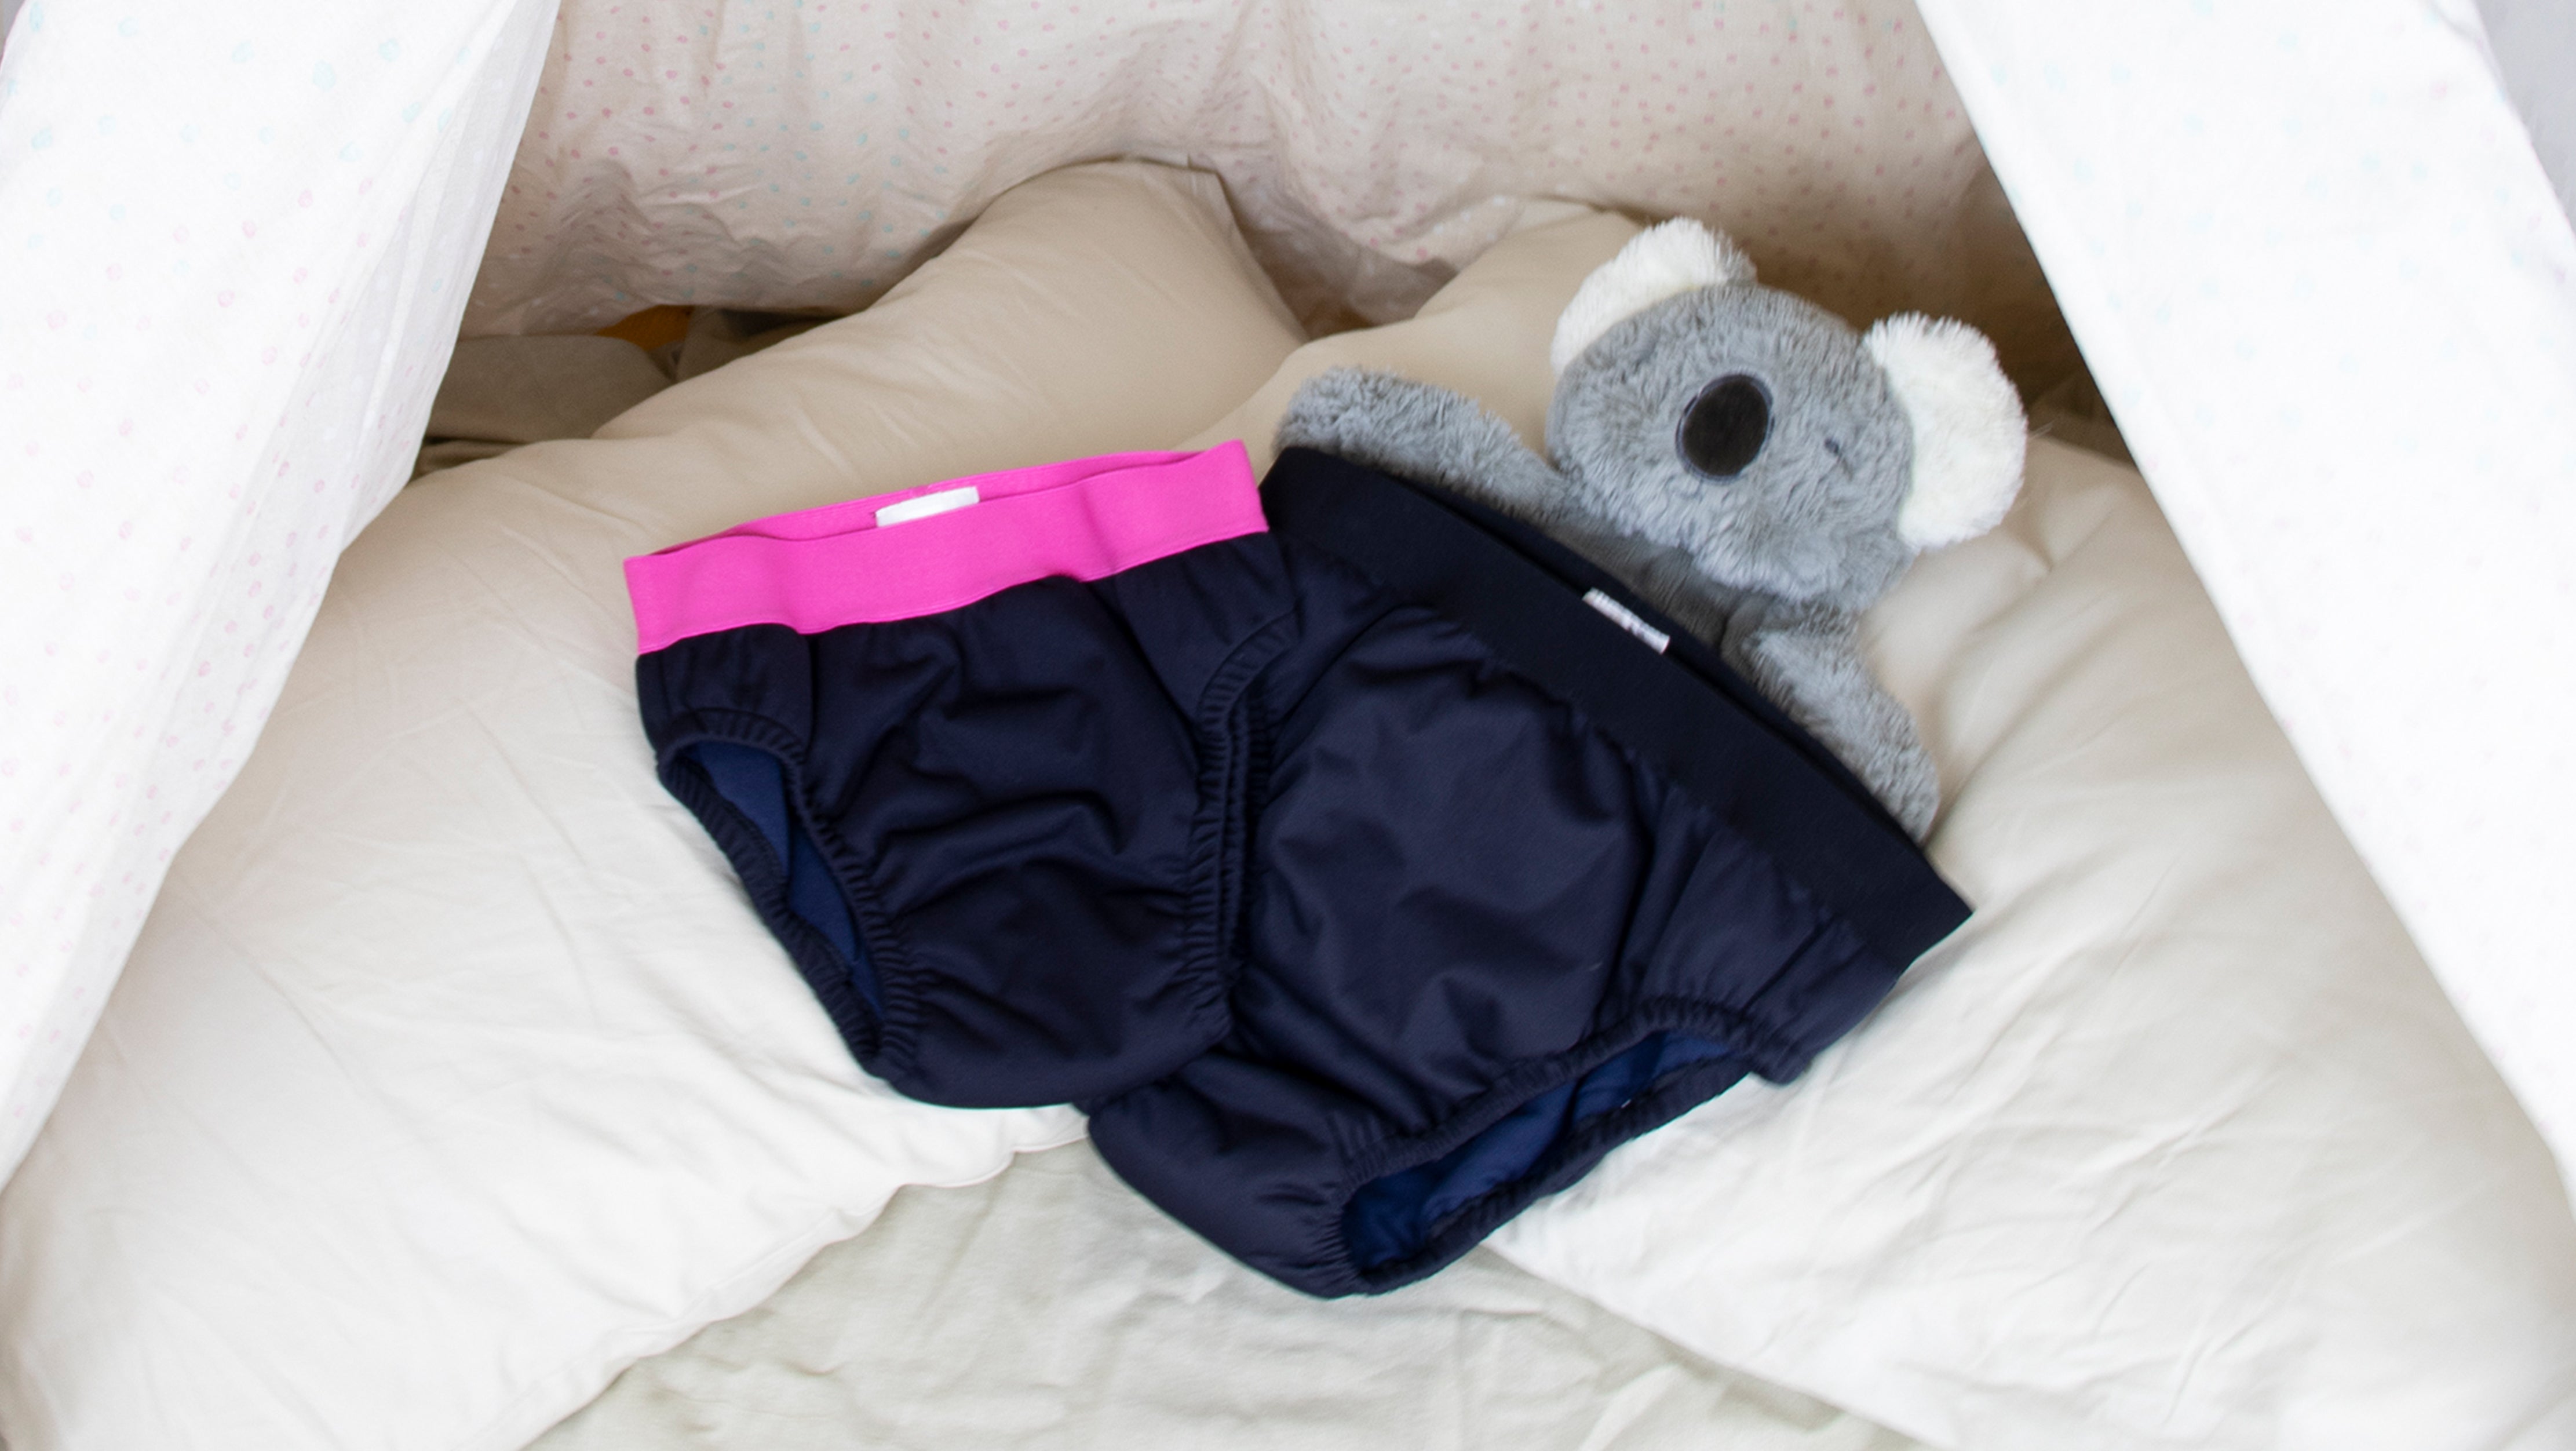 Disposable Childrens Absorbent Underwear: Bedwetting Store